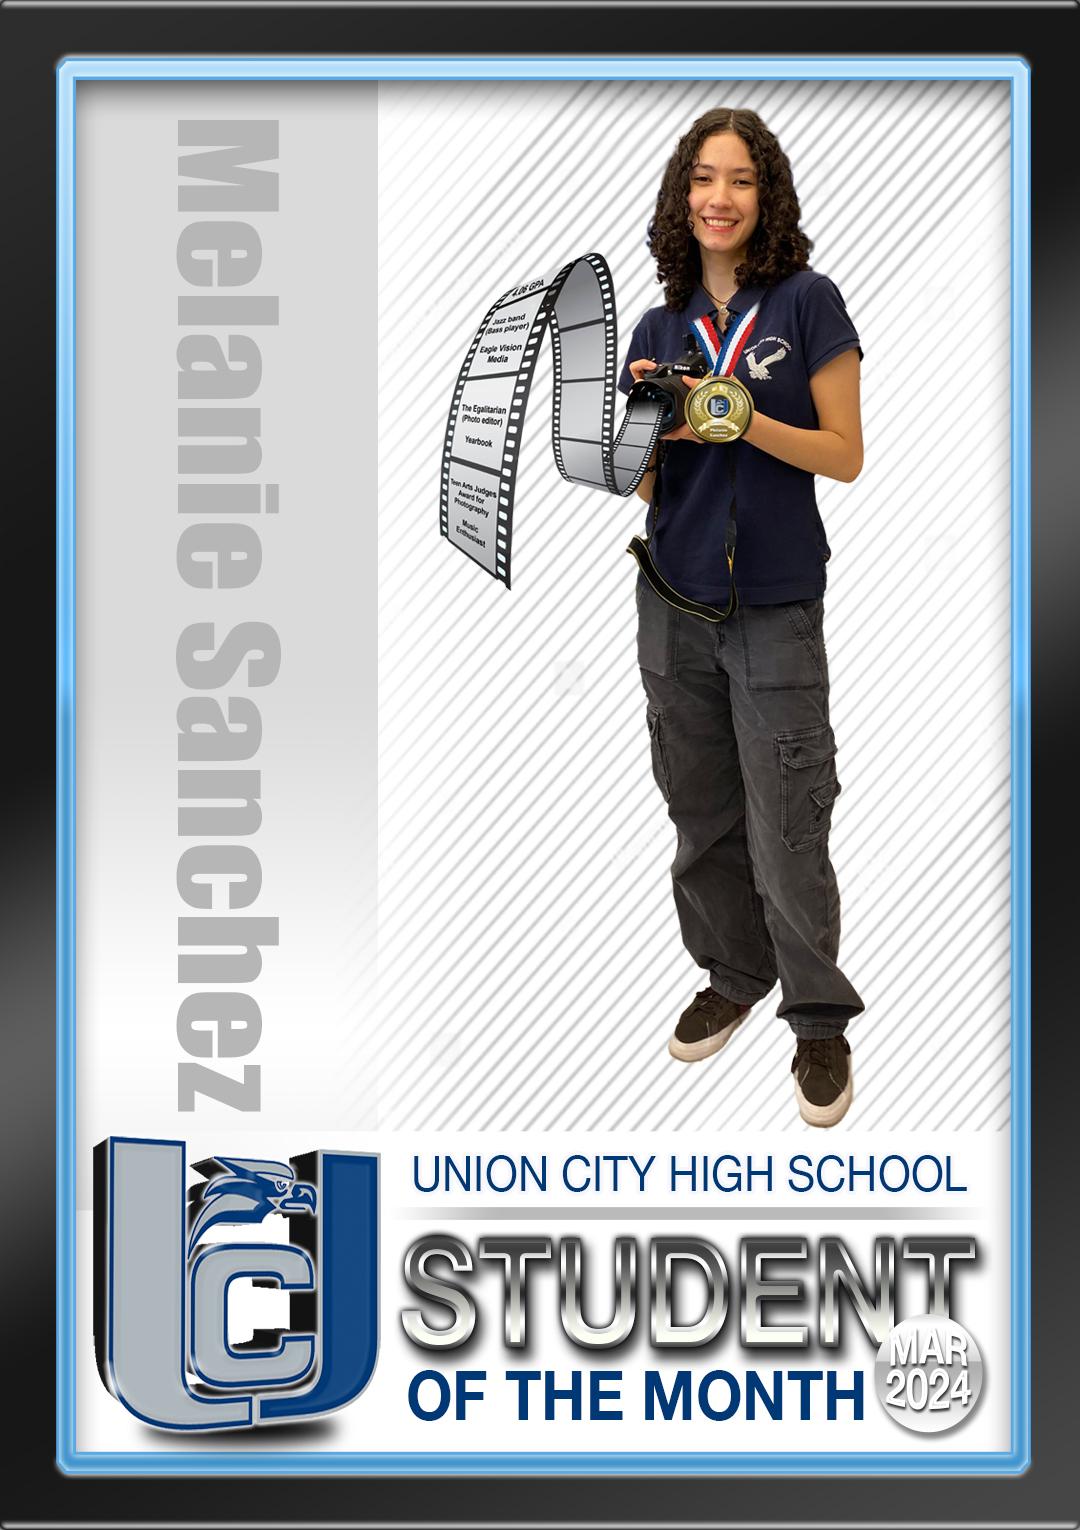 The Union City High School March 2024 Students of The Month